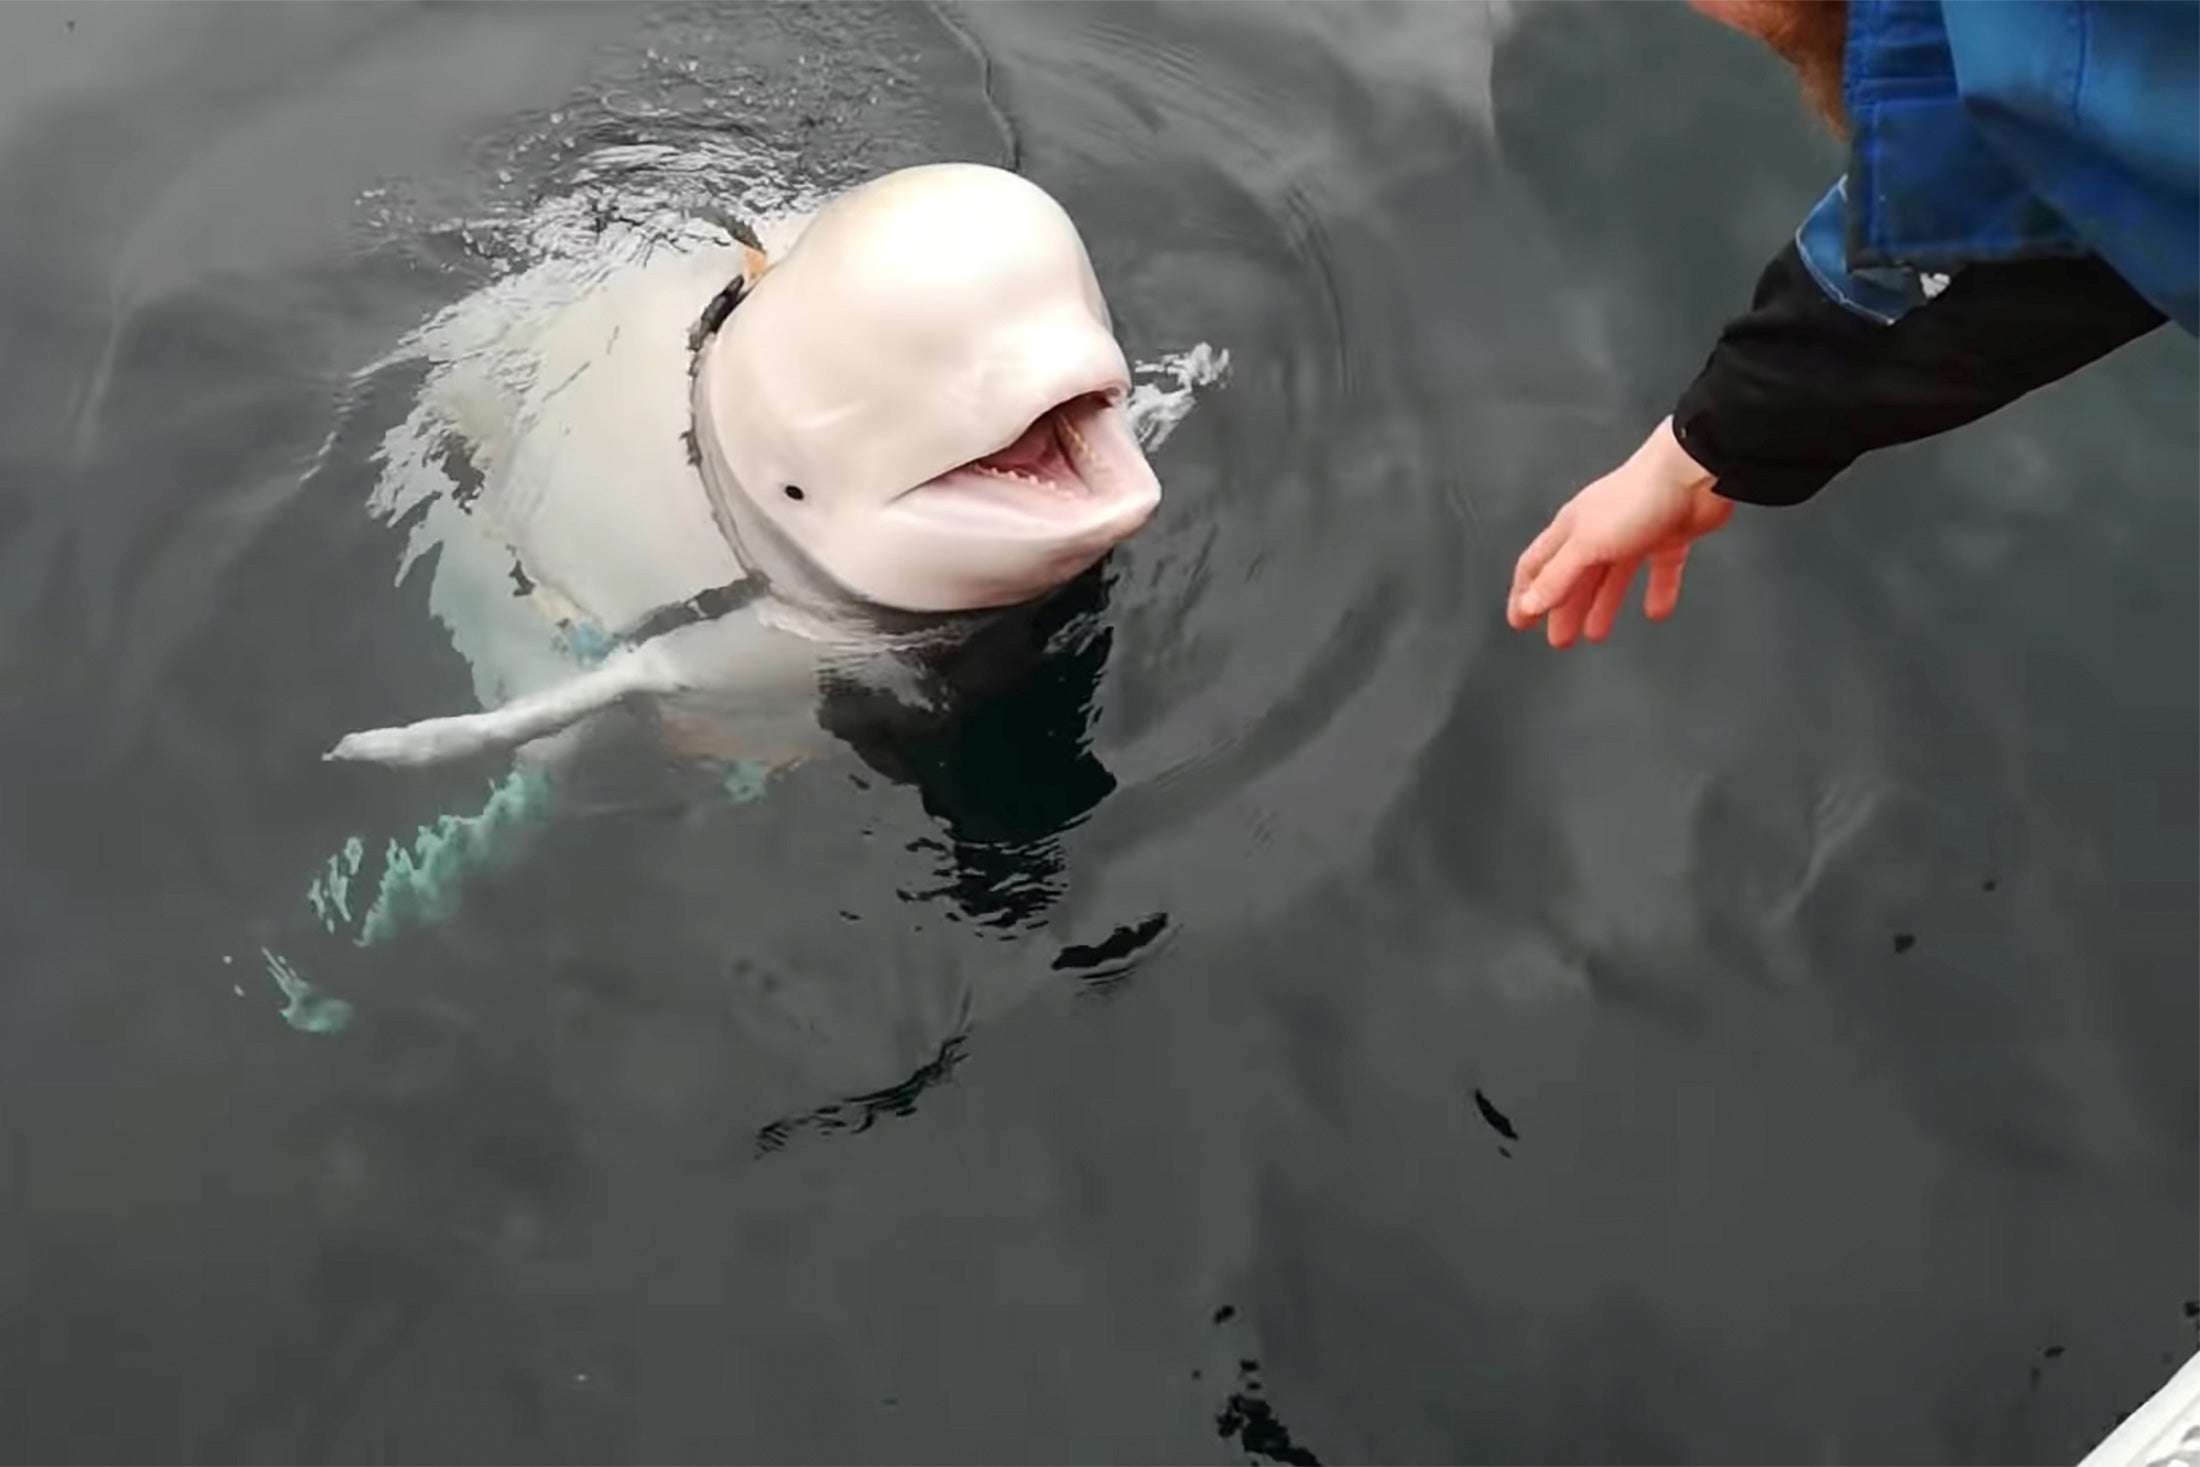 A human reaches out toward a beluga whale wearing a harness and camera.